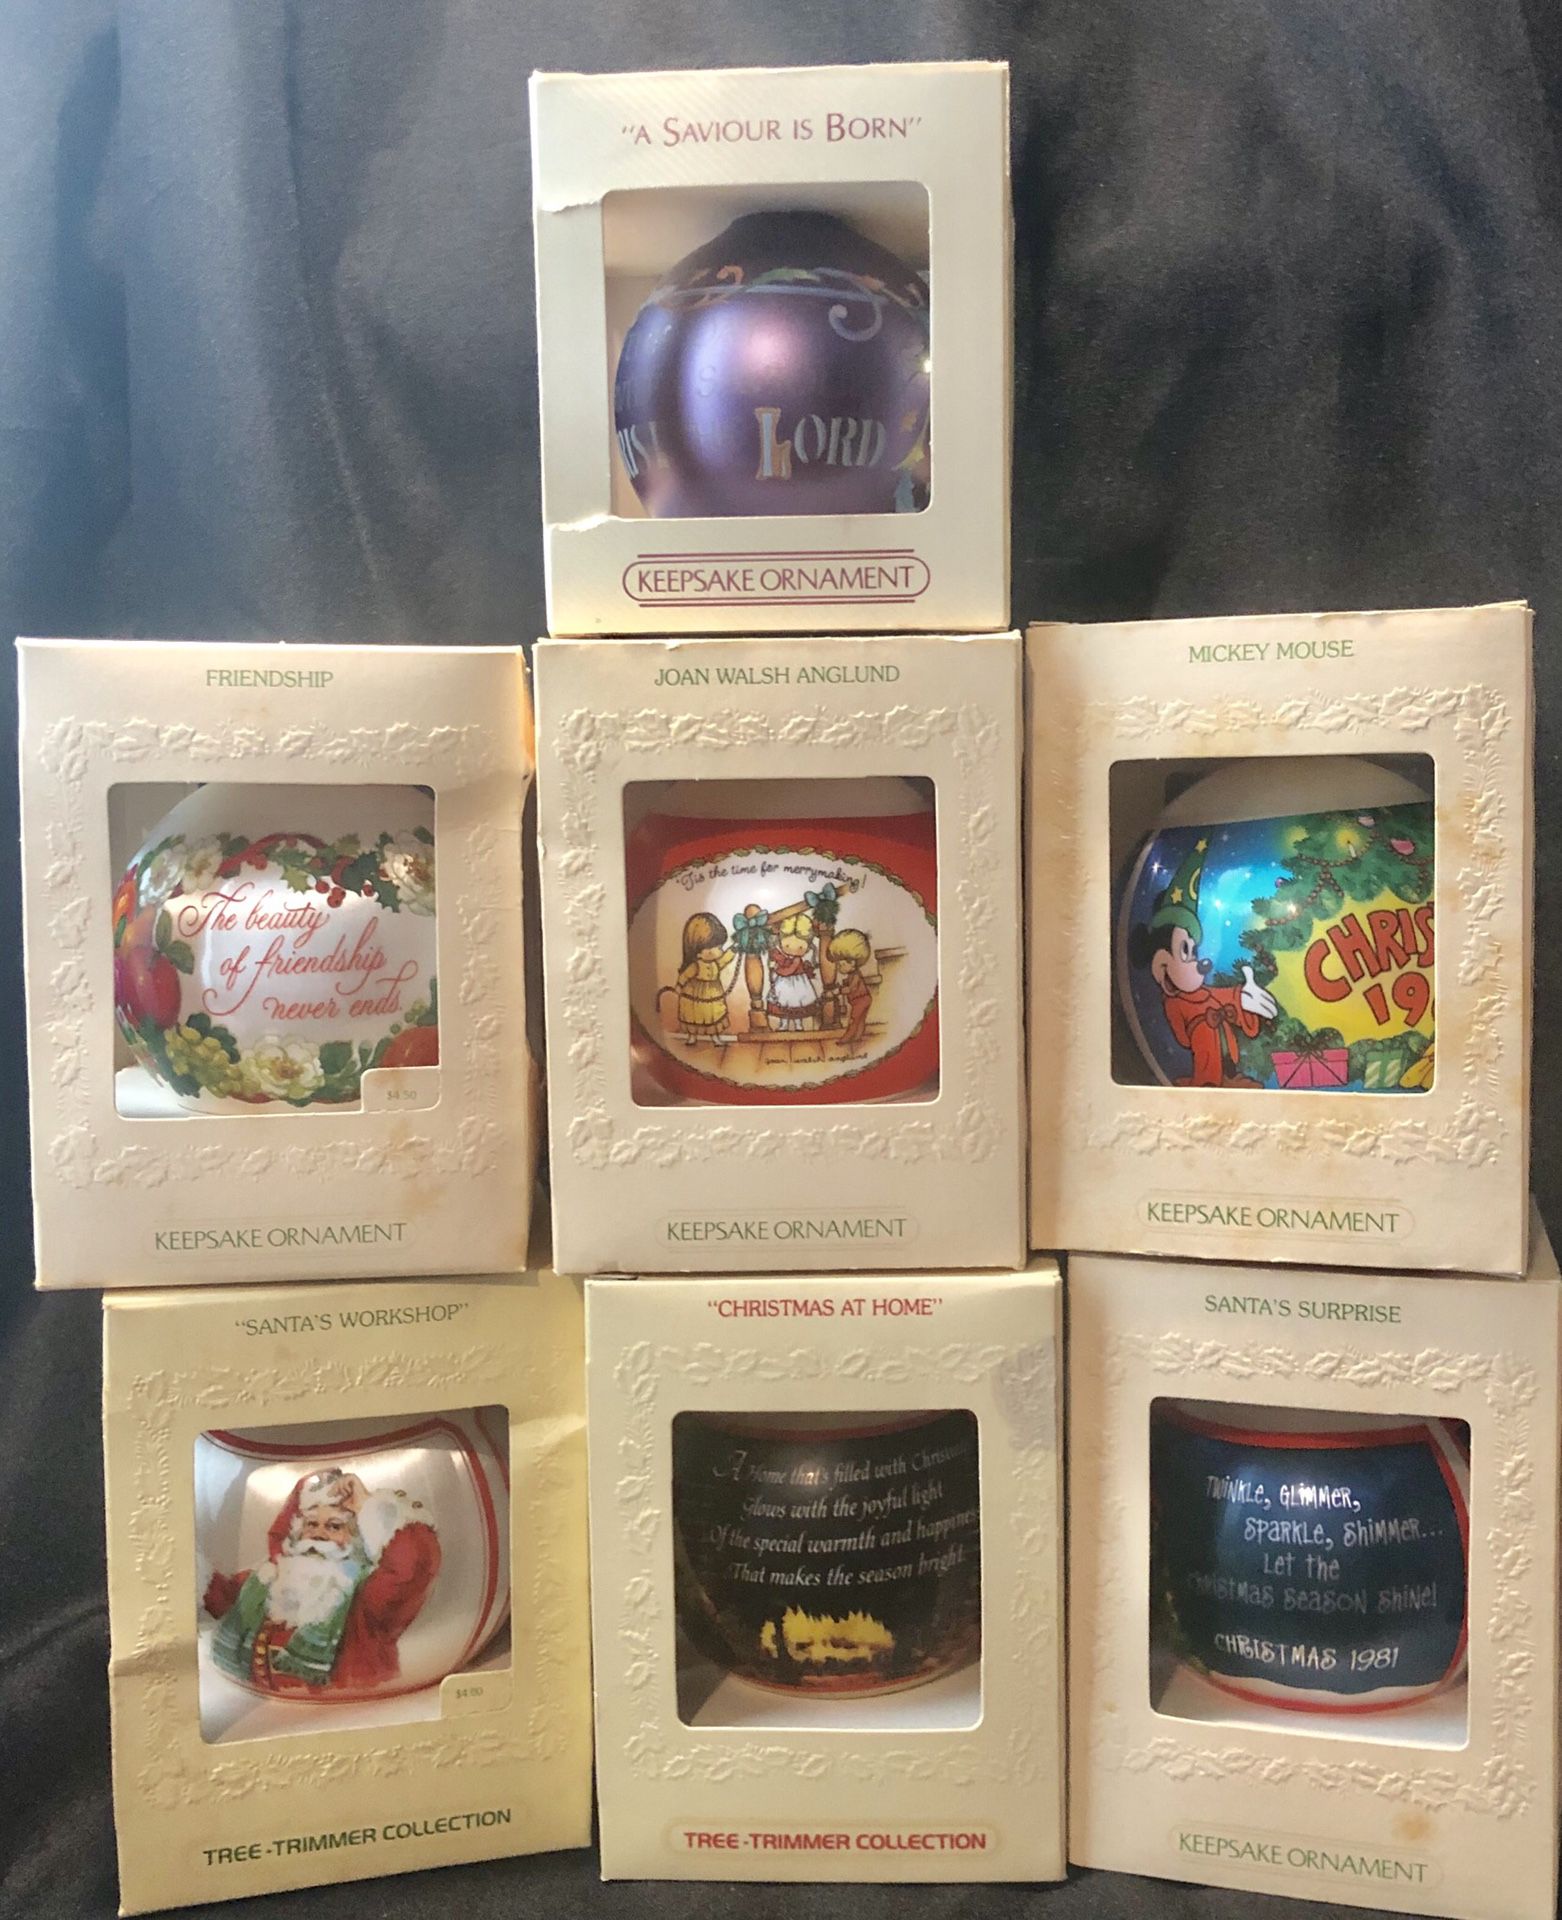 Vintage 1980s Christmas Ornaments by Hallmark, Keepsake Collectible Glass Ornaments in original boxes